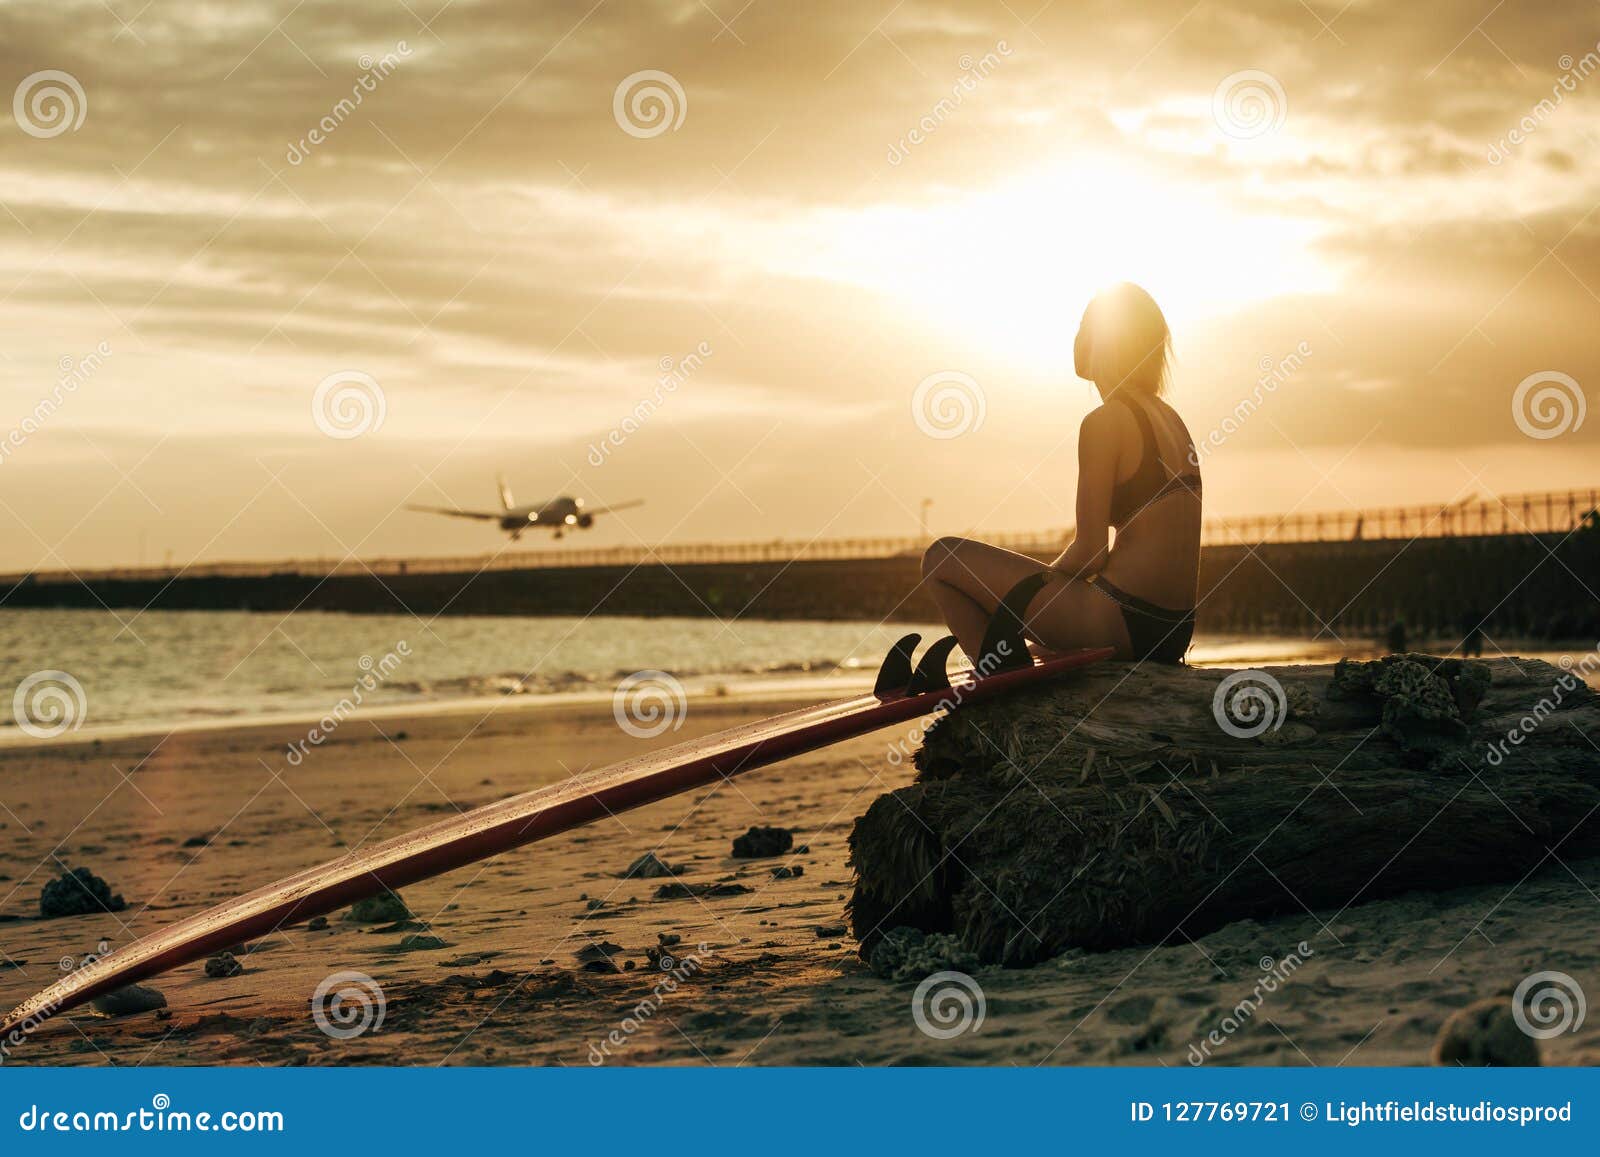 Woman Sitting On Rock With Surfboard On Beach At Sunset With Airplane